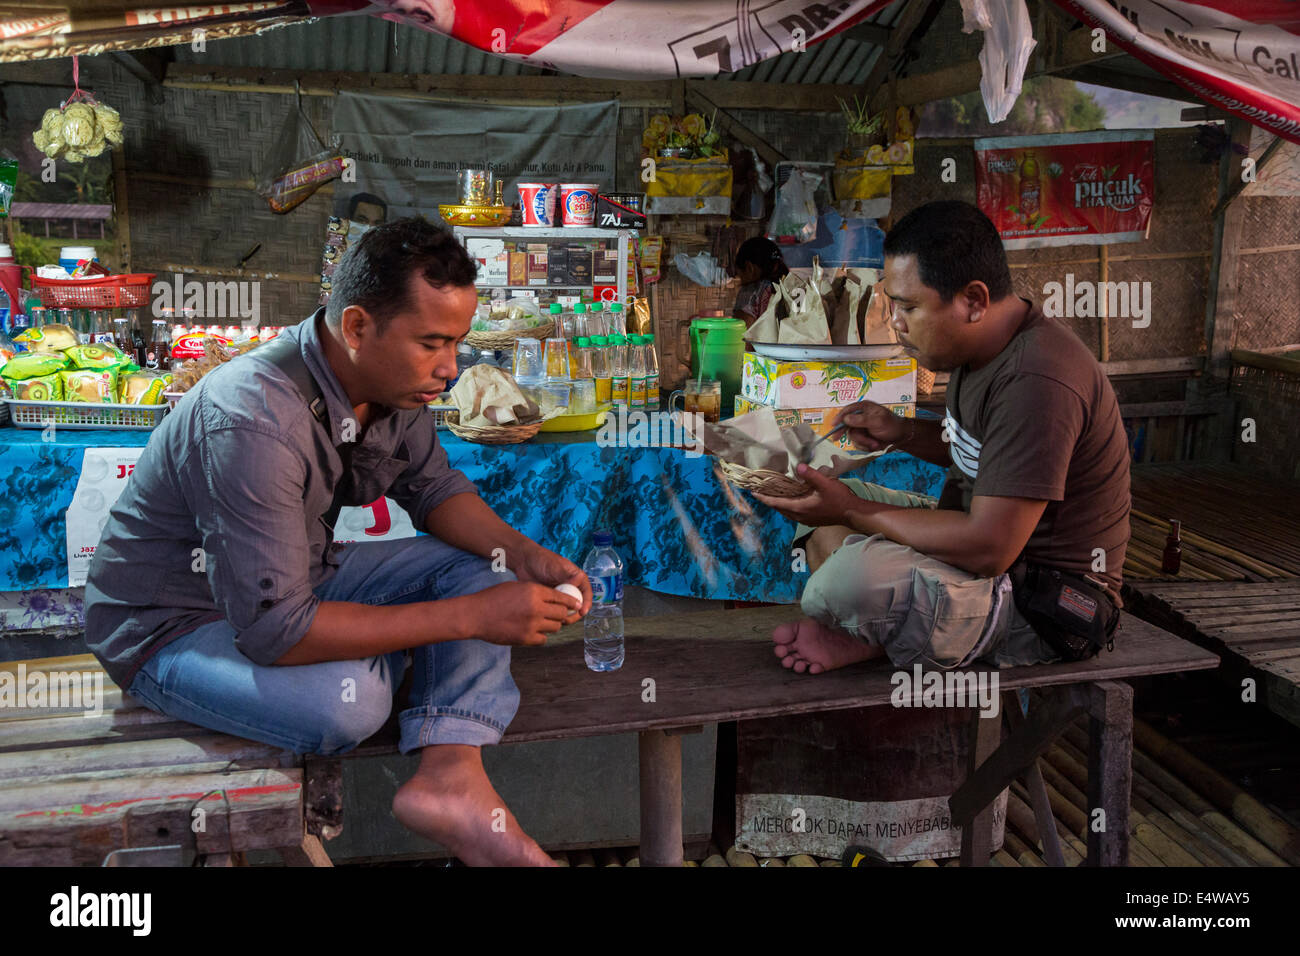 Bali, Indonesia.  Two Men Having Breakfast at a Roadside Refreshment Stand, Early Morning. Stock Photo